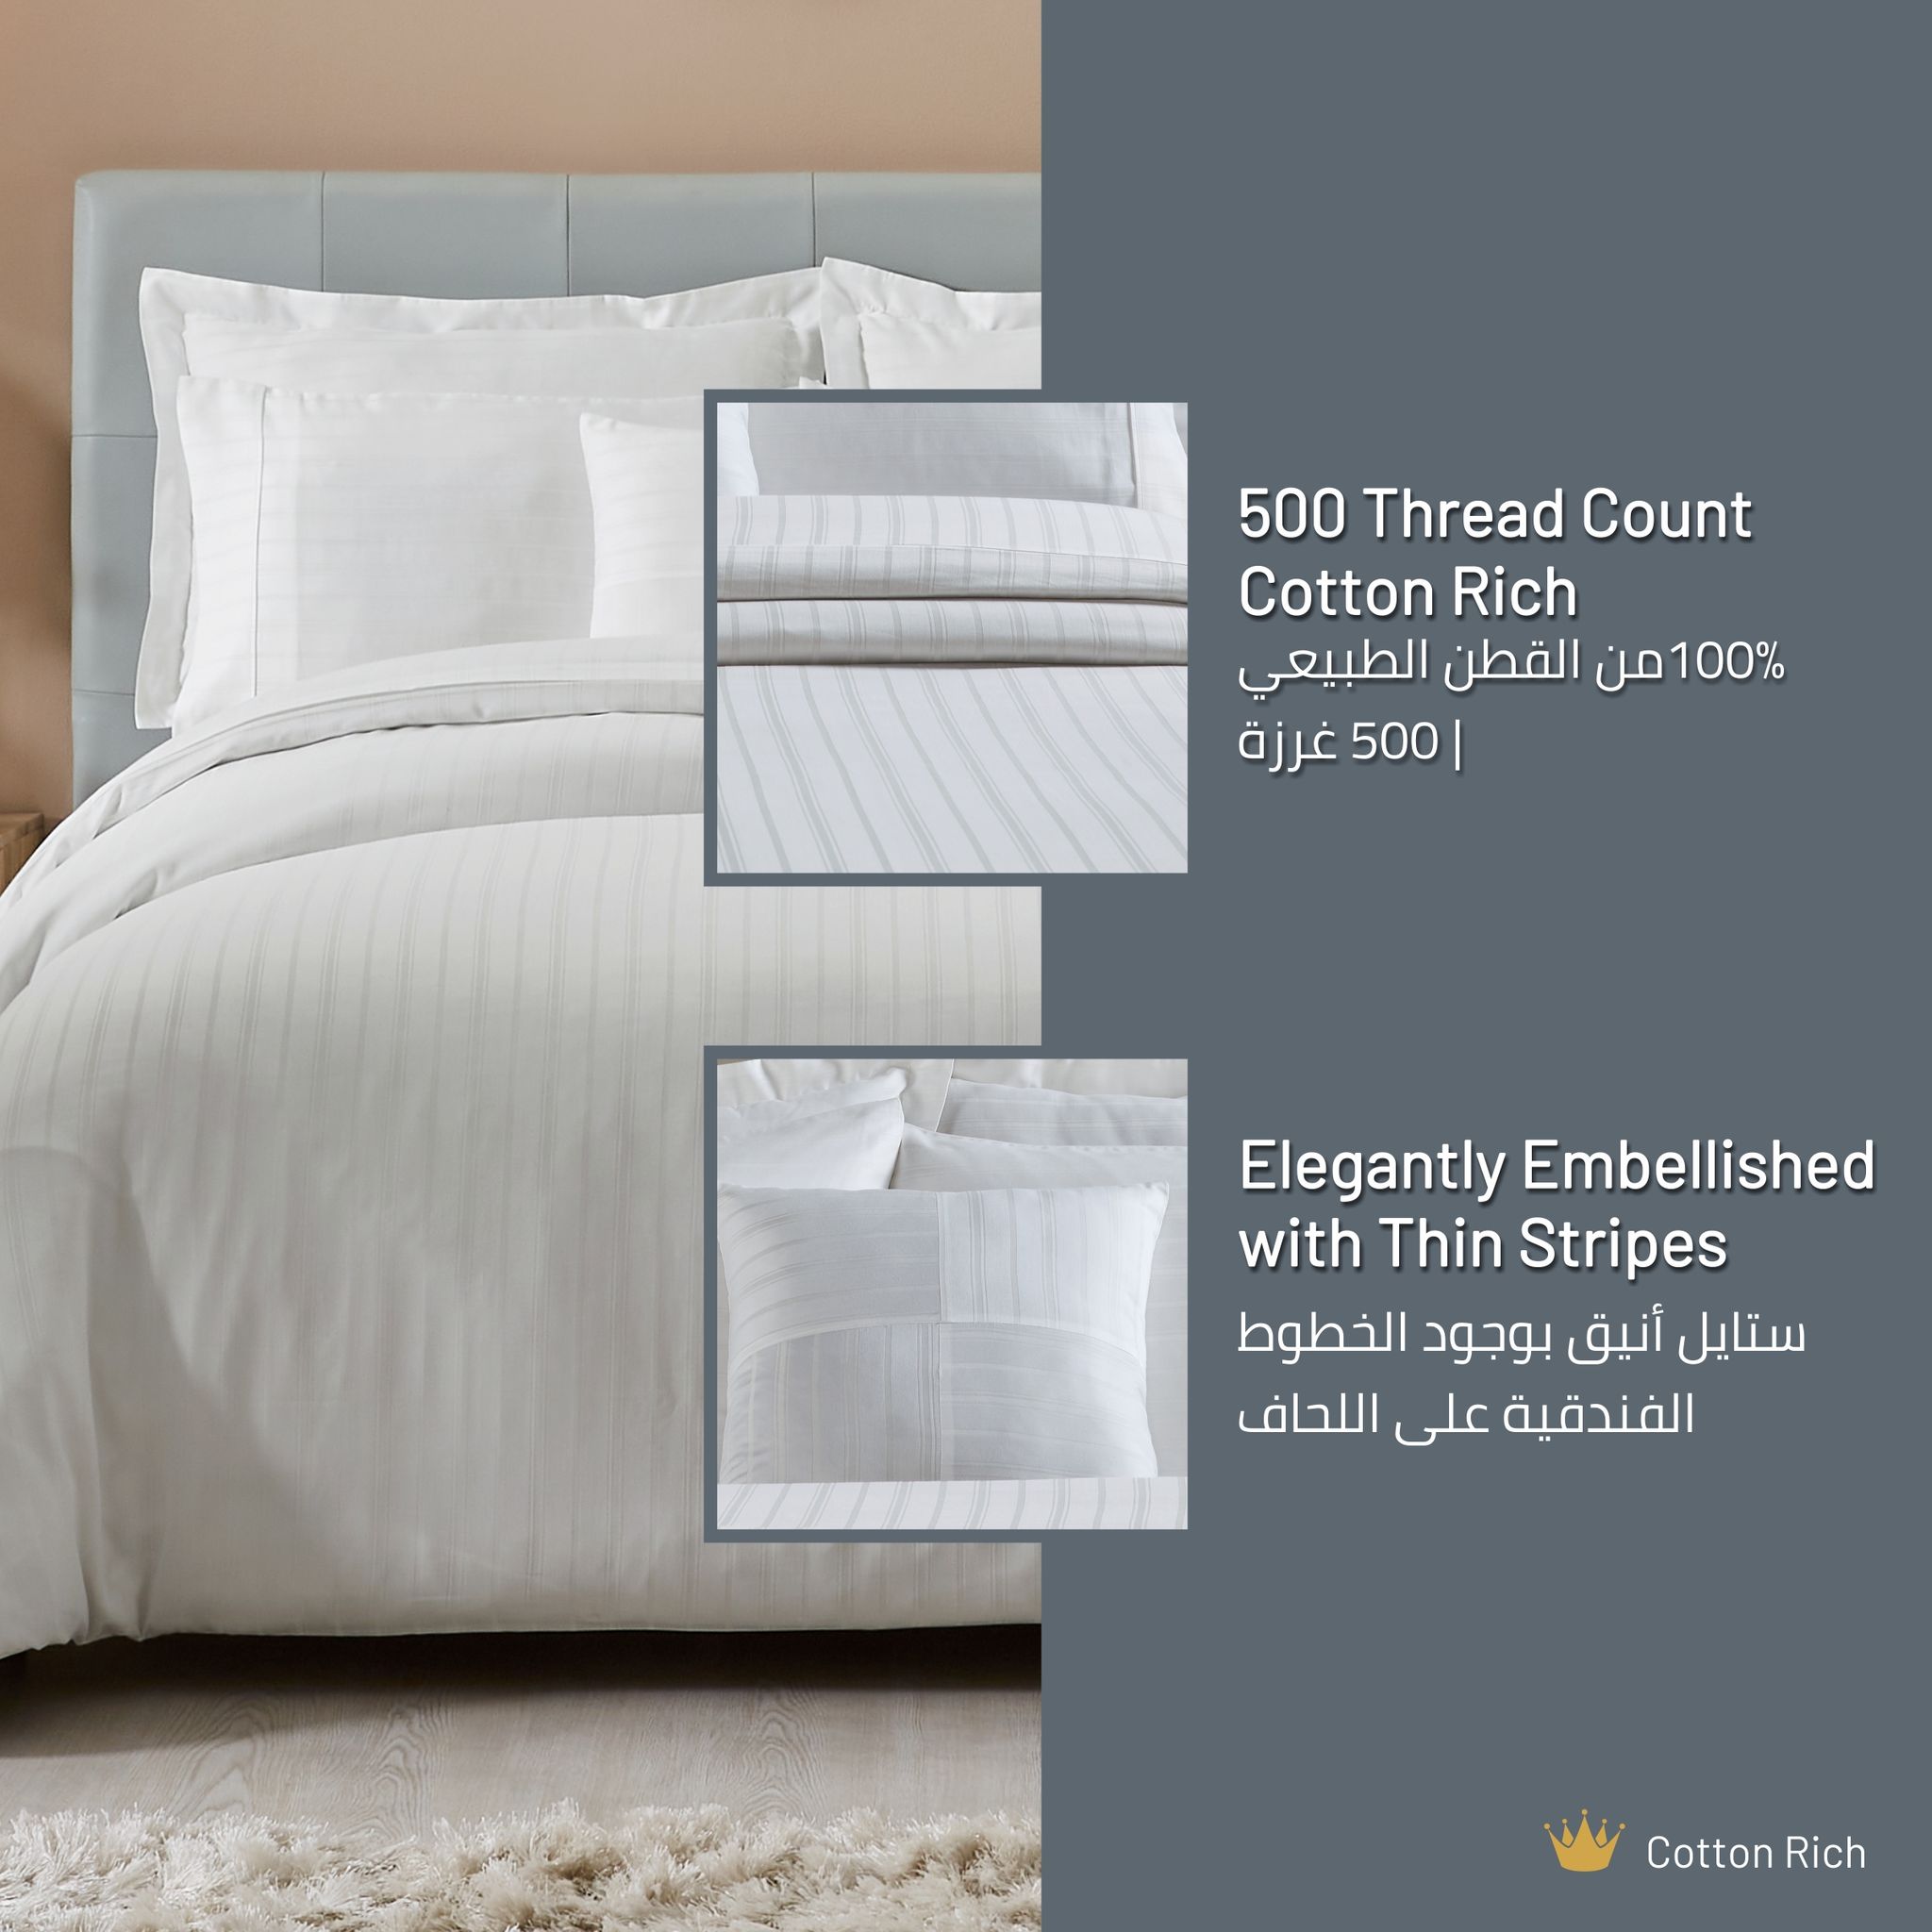 8-Piece Hotel Style Comforter Cotton Rich, 500 Thread Count Damask Stripes, King Size, White